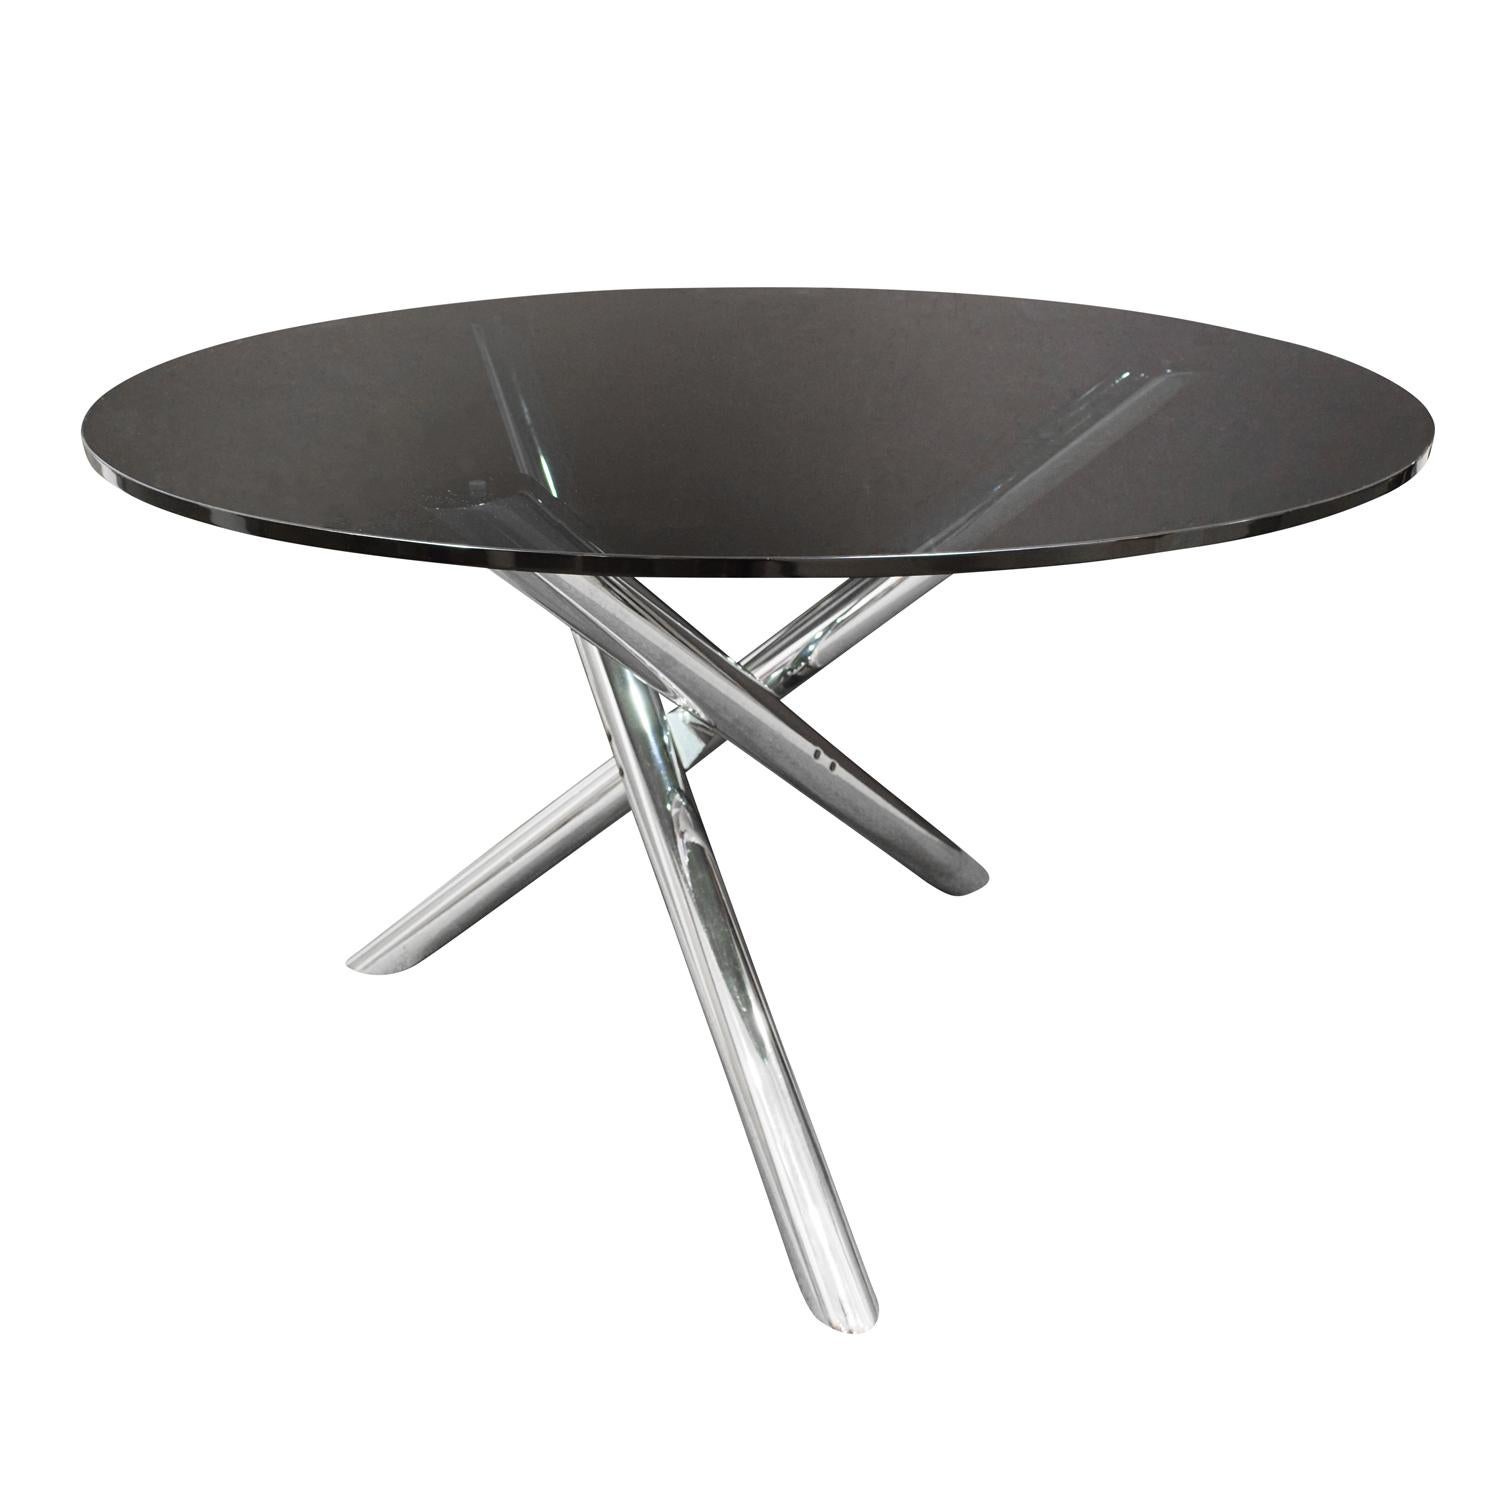 Sculptural dining/game table with base in polished chrome with smoked glass top attributed to Milo Baughman, American 1970s.